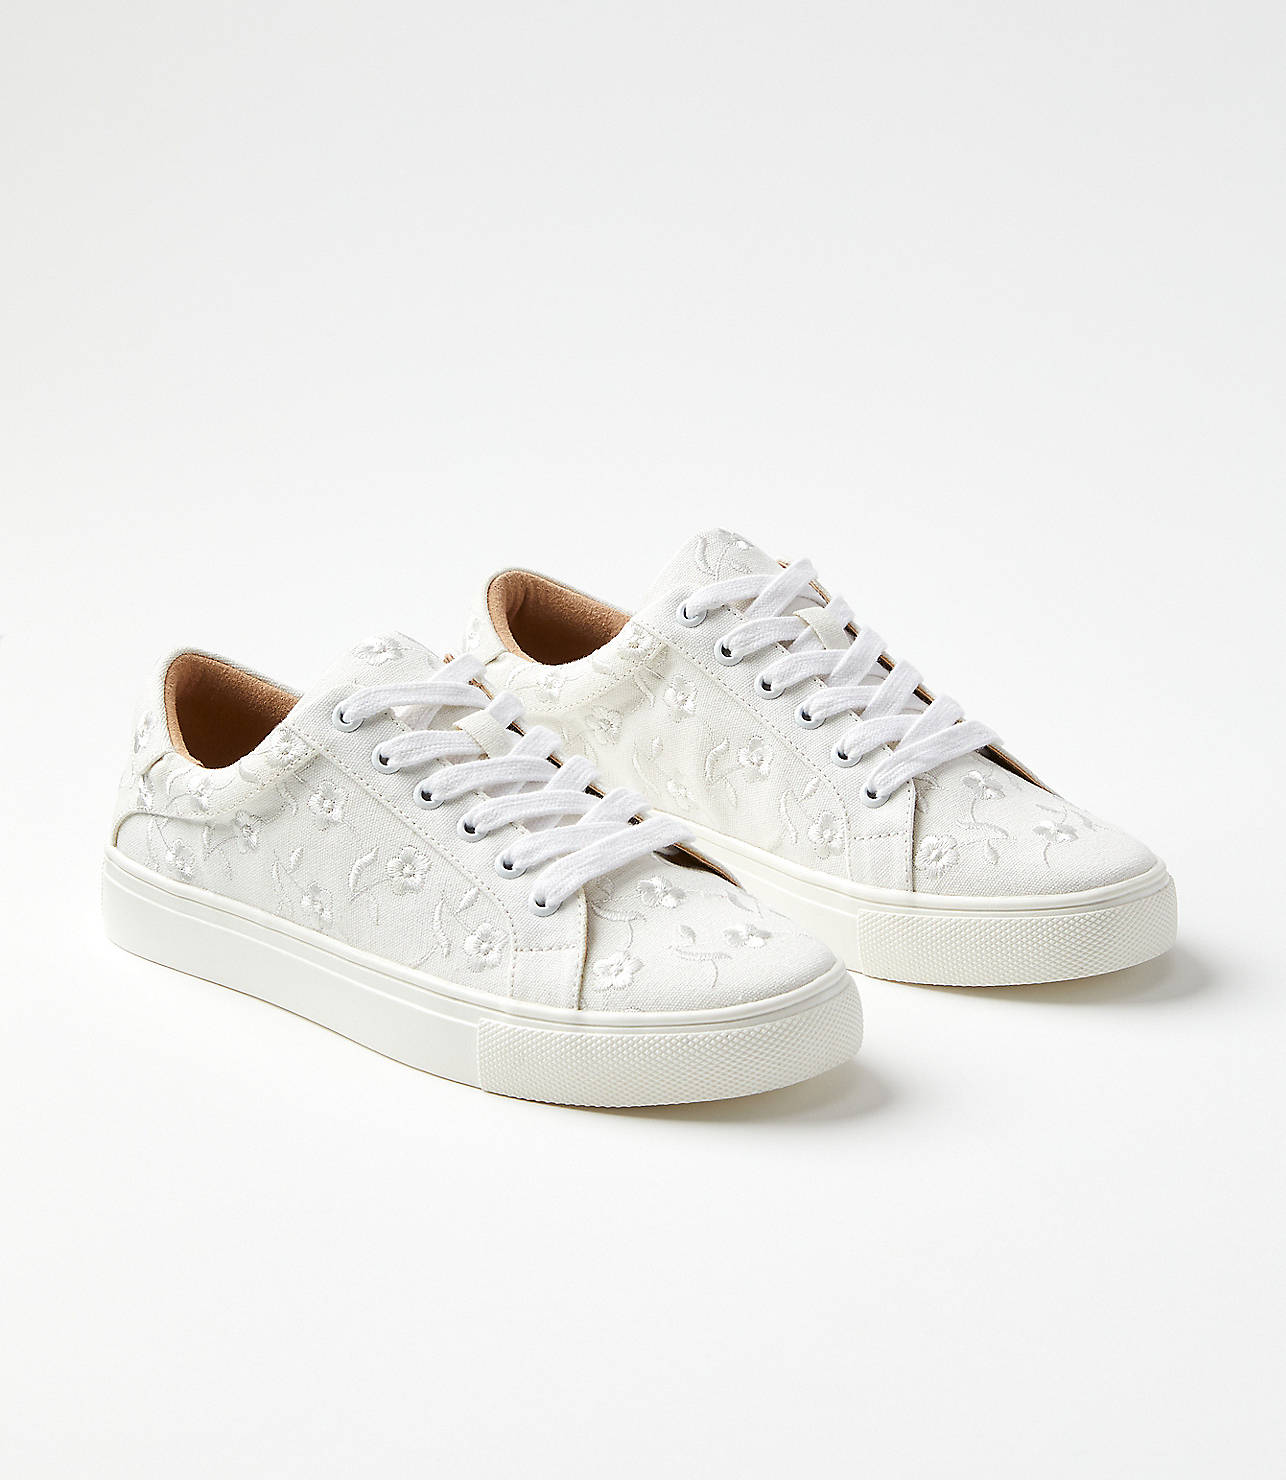 Eyelet Lace Up Sneakers